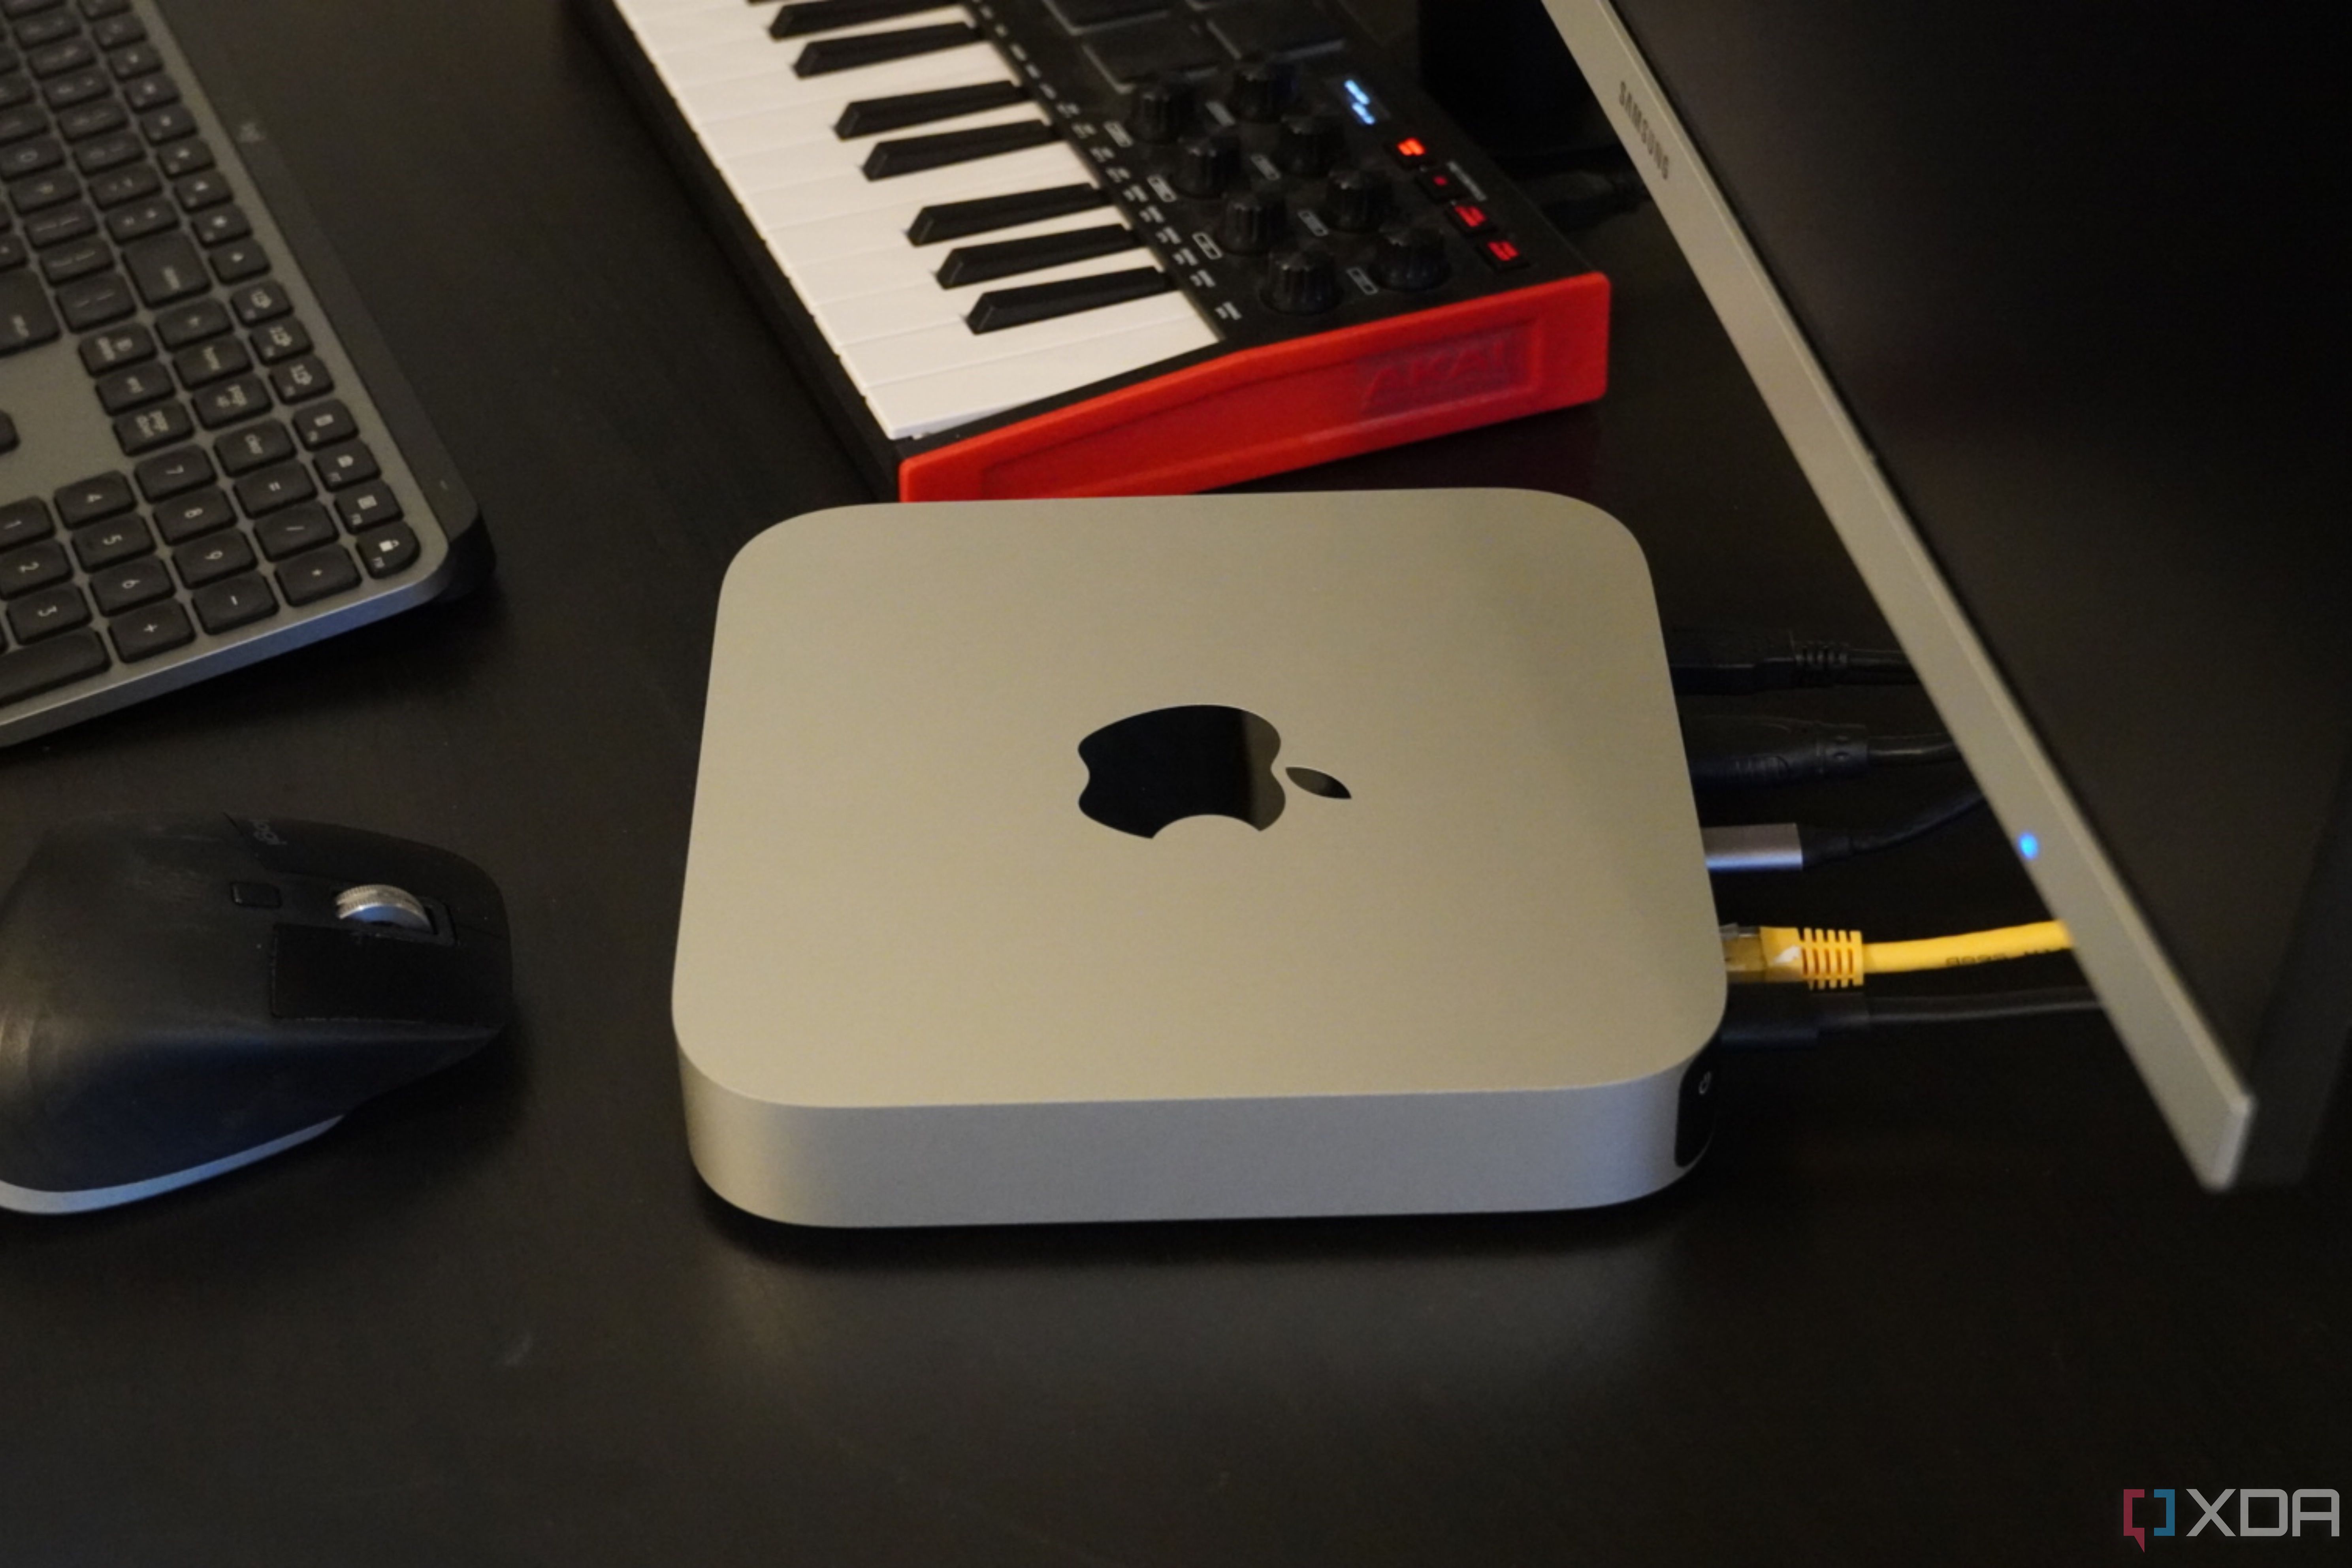 A side view of the Mac Mini.